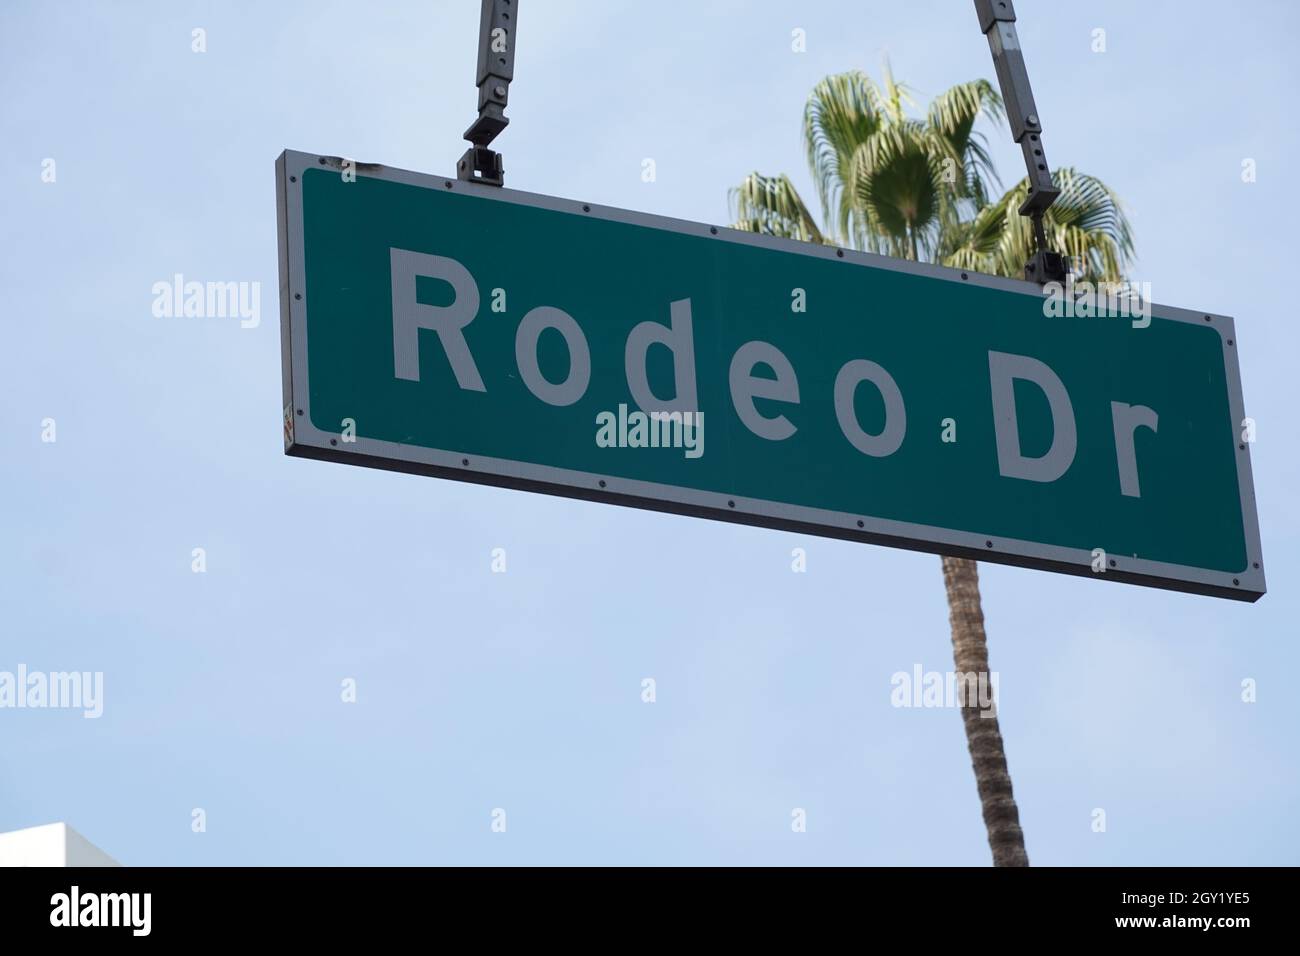 File:Rodeo Drive Sign in Beverly Hills California.JPG - Wikimedia Commons